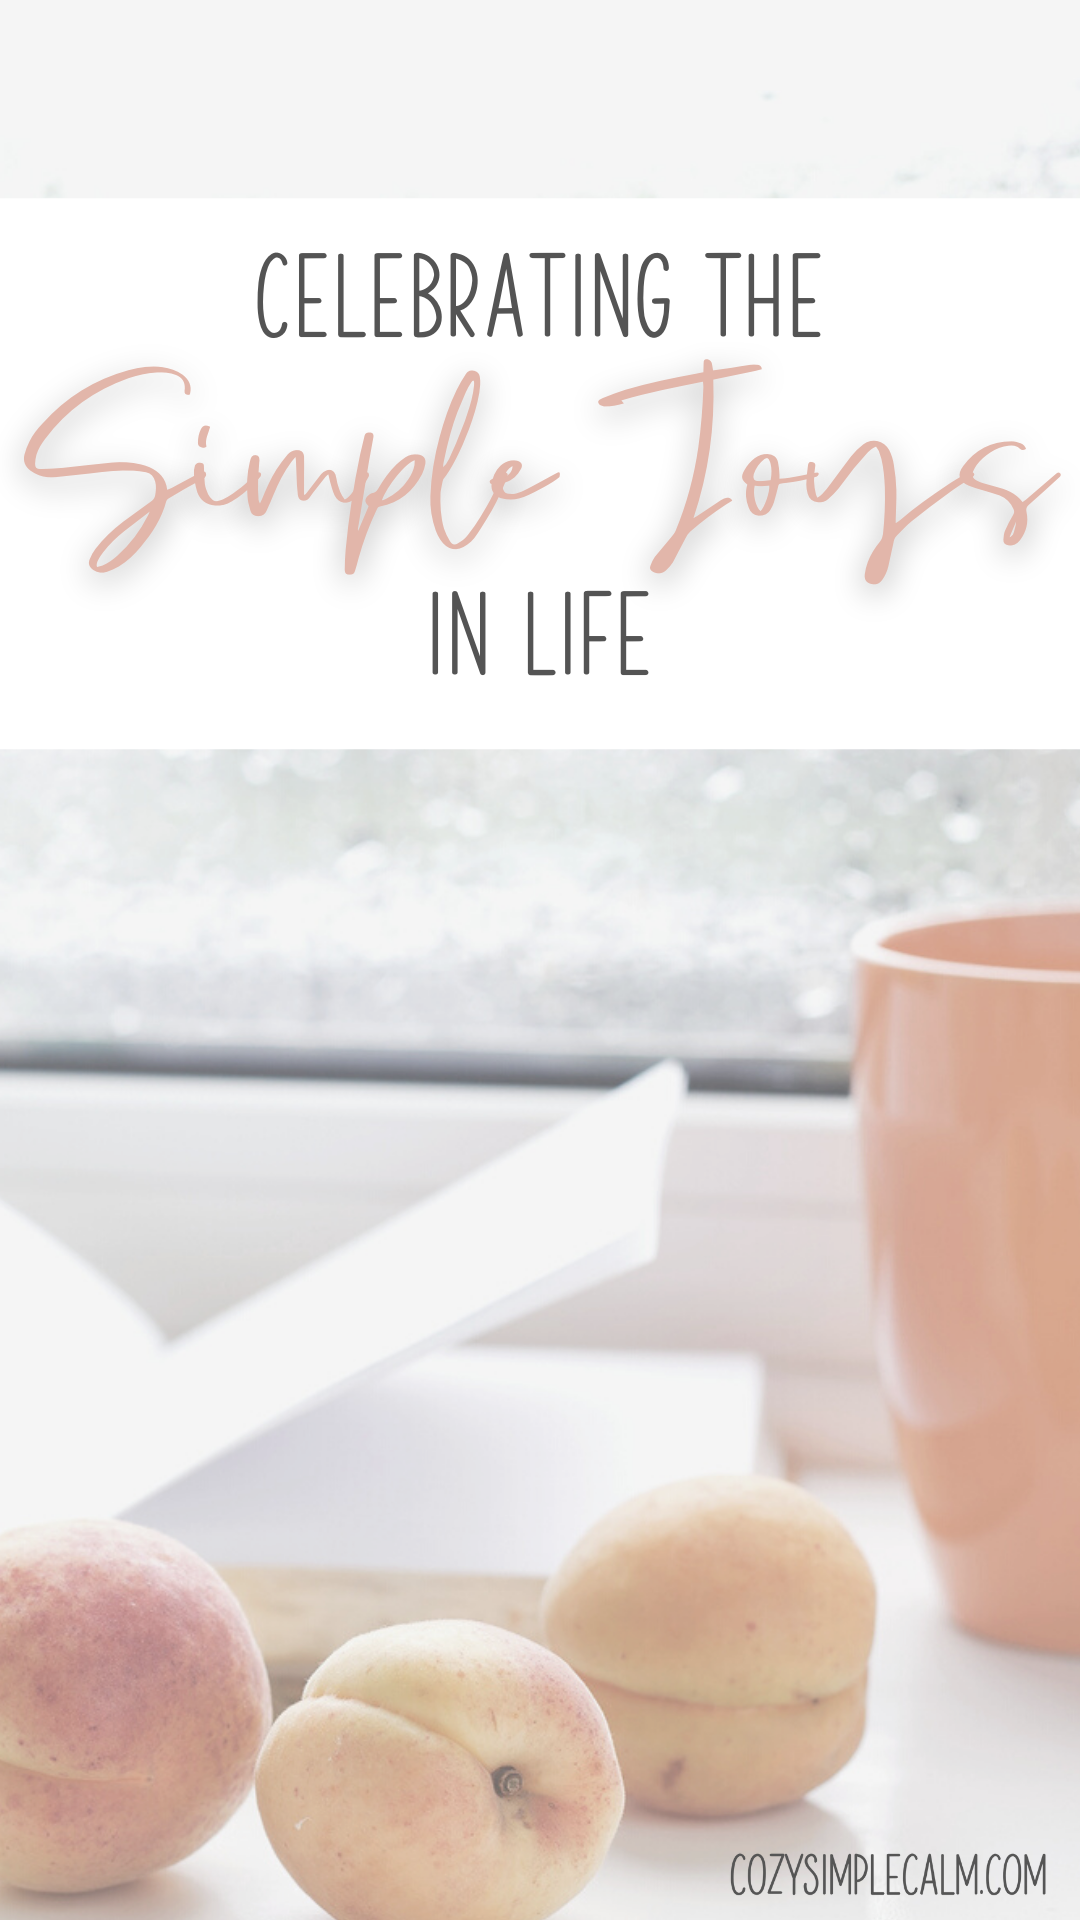 Image of orange mug, open book, and three peaches - text overlay: Celebrating the simple joys in life